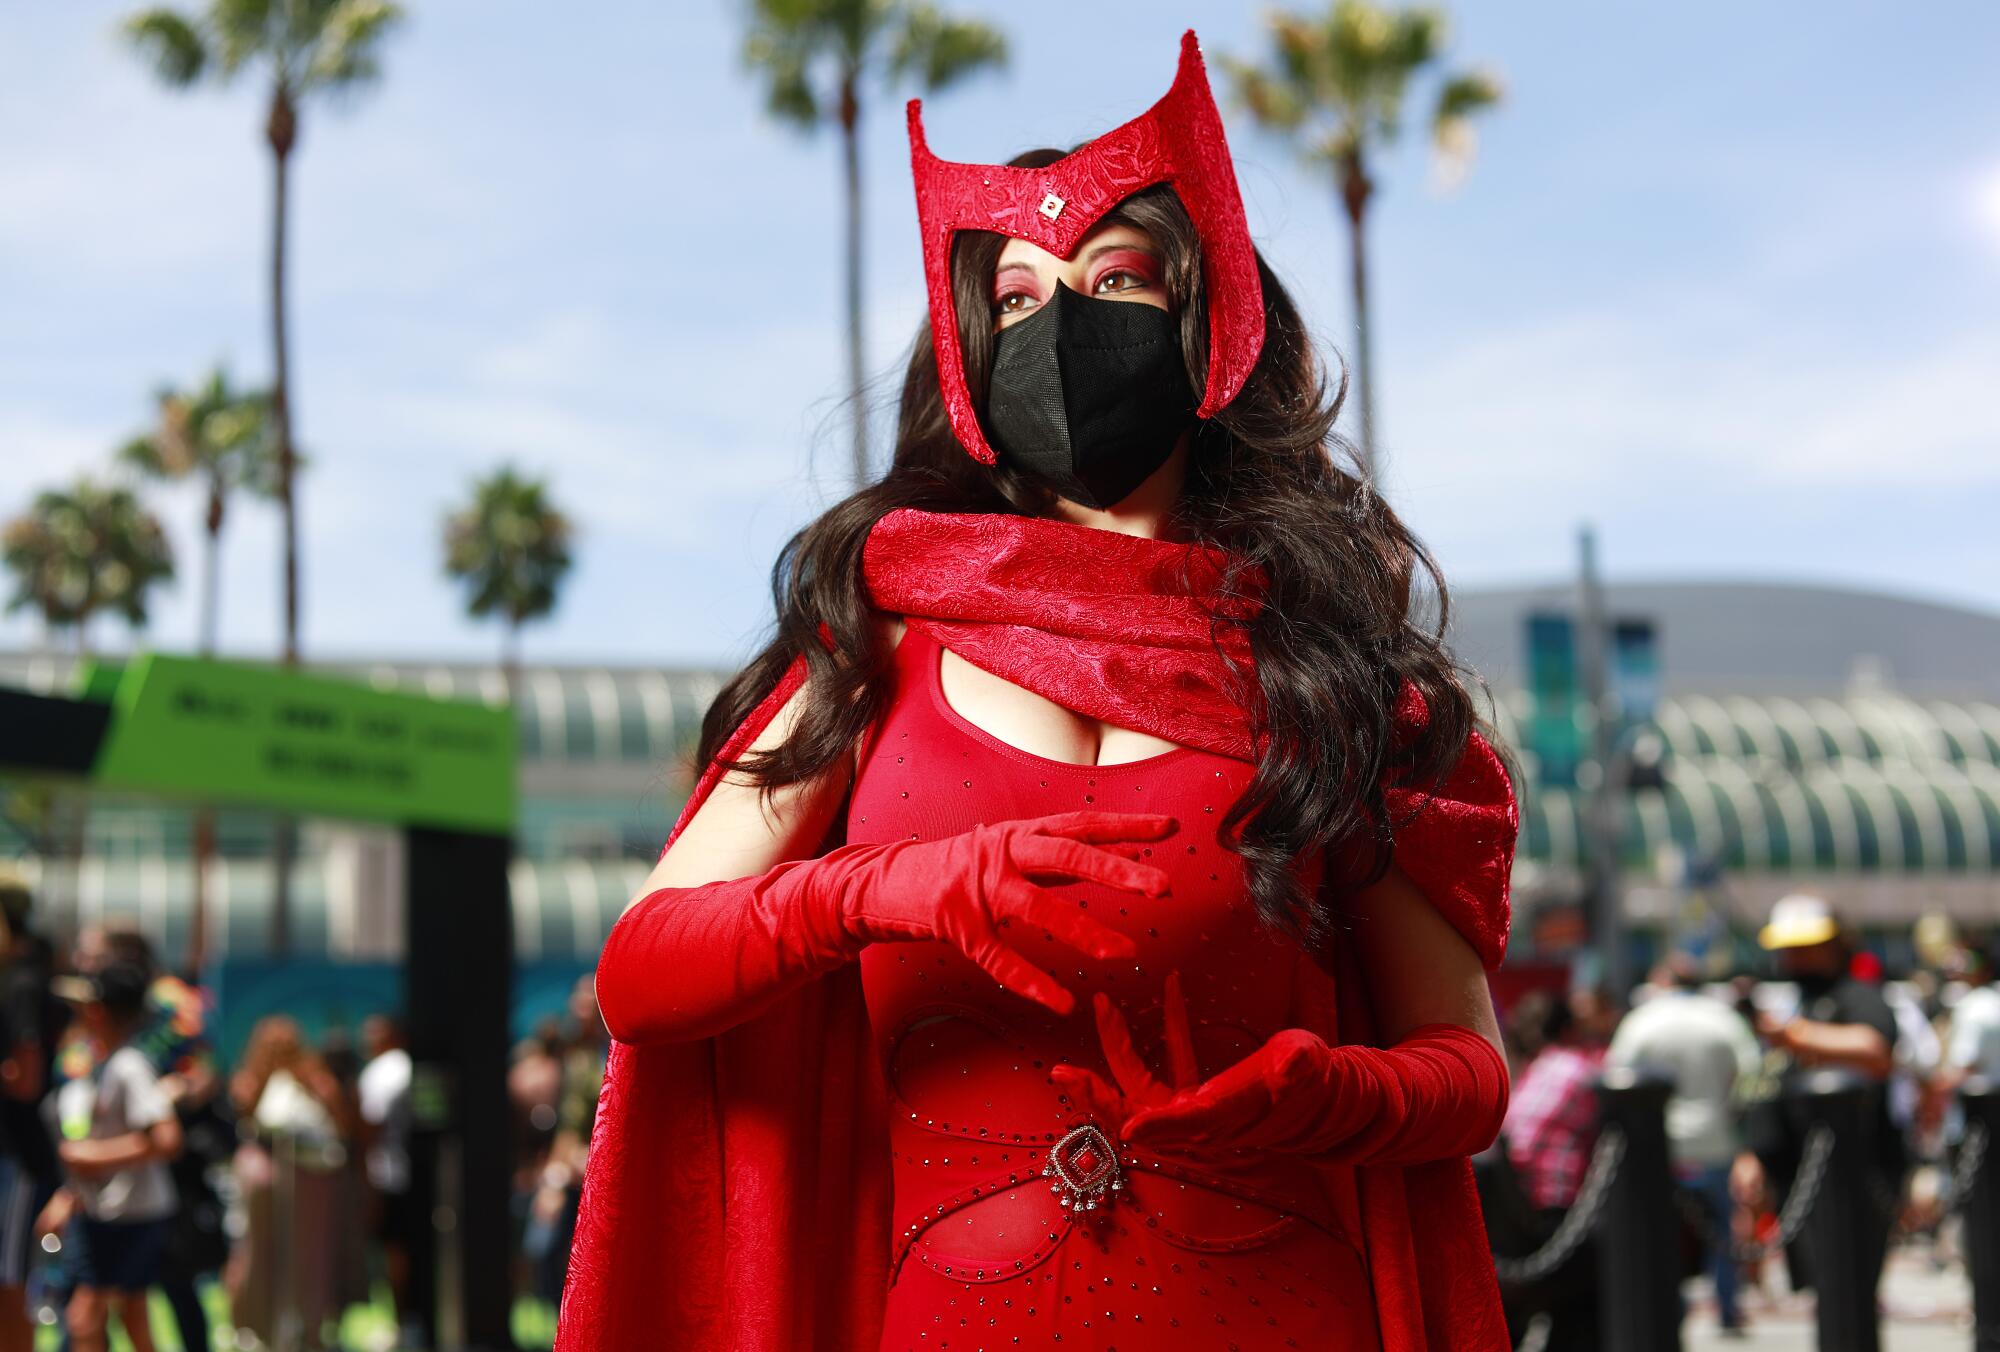 Aravis Rey of Riverside dressed as Scarlet Witch at Comic-Con.